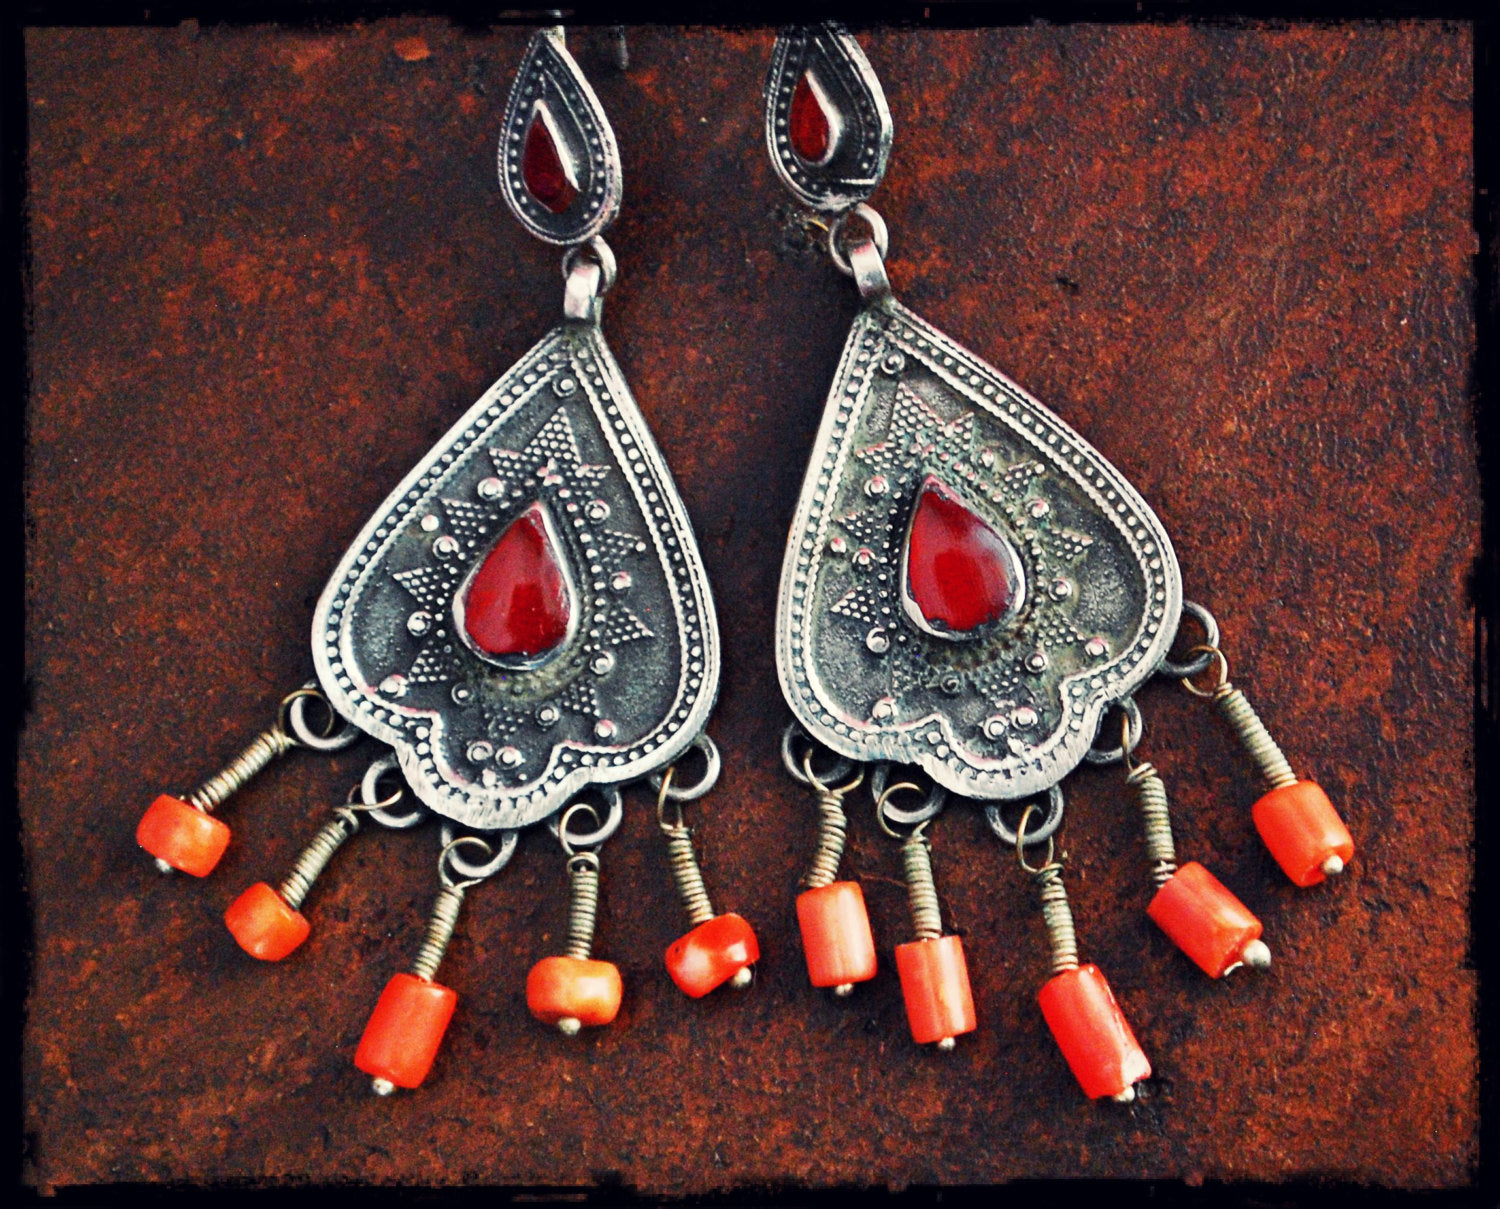 Tribal Afghan Earrings with Coral and Carnelian - Kazakh Earrings with Coral and Carnelian - Tribal Silver Coral Earrings